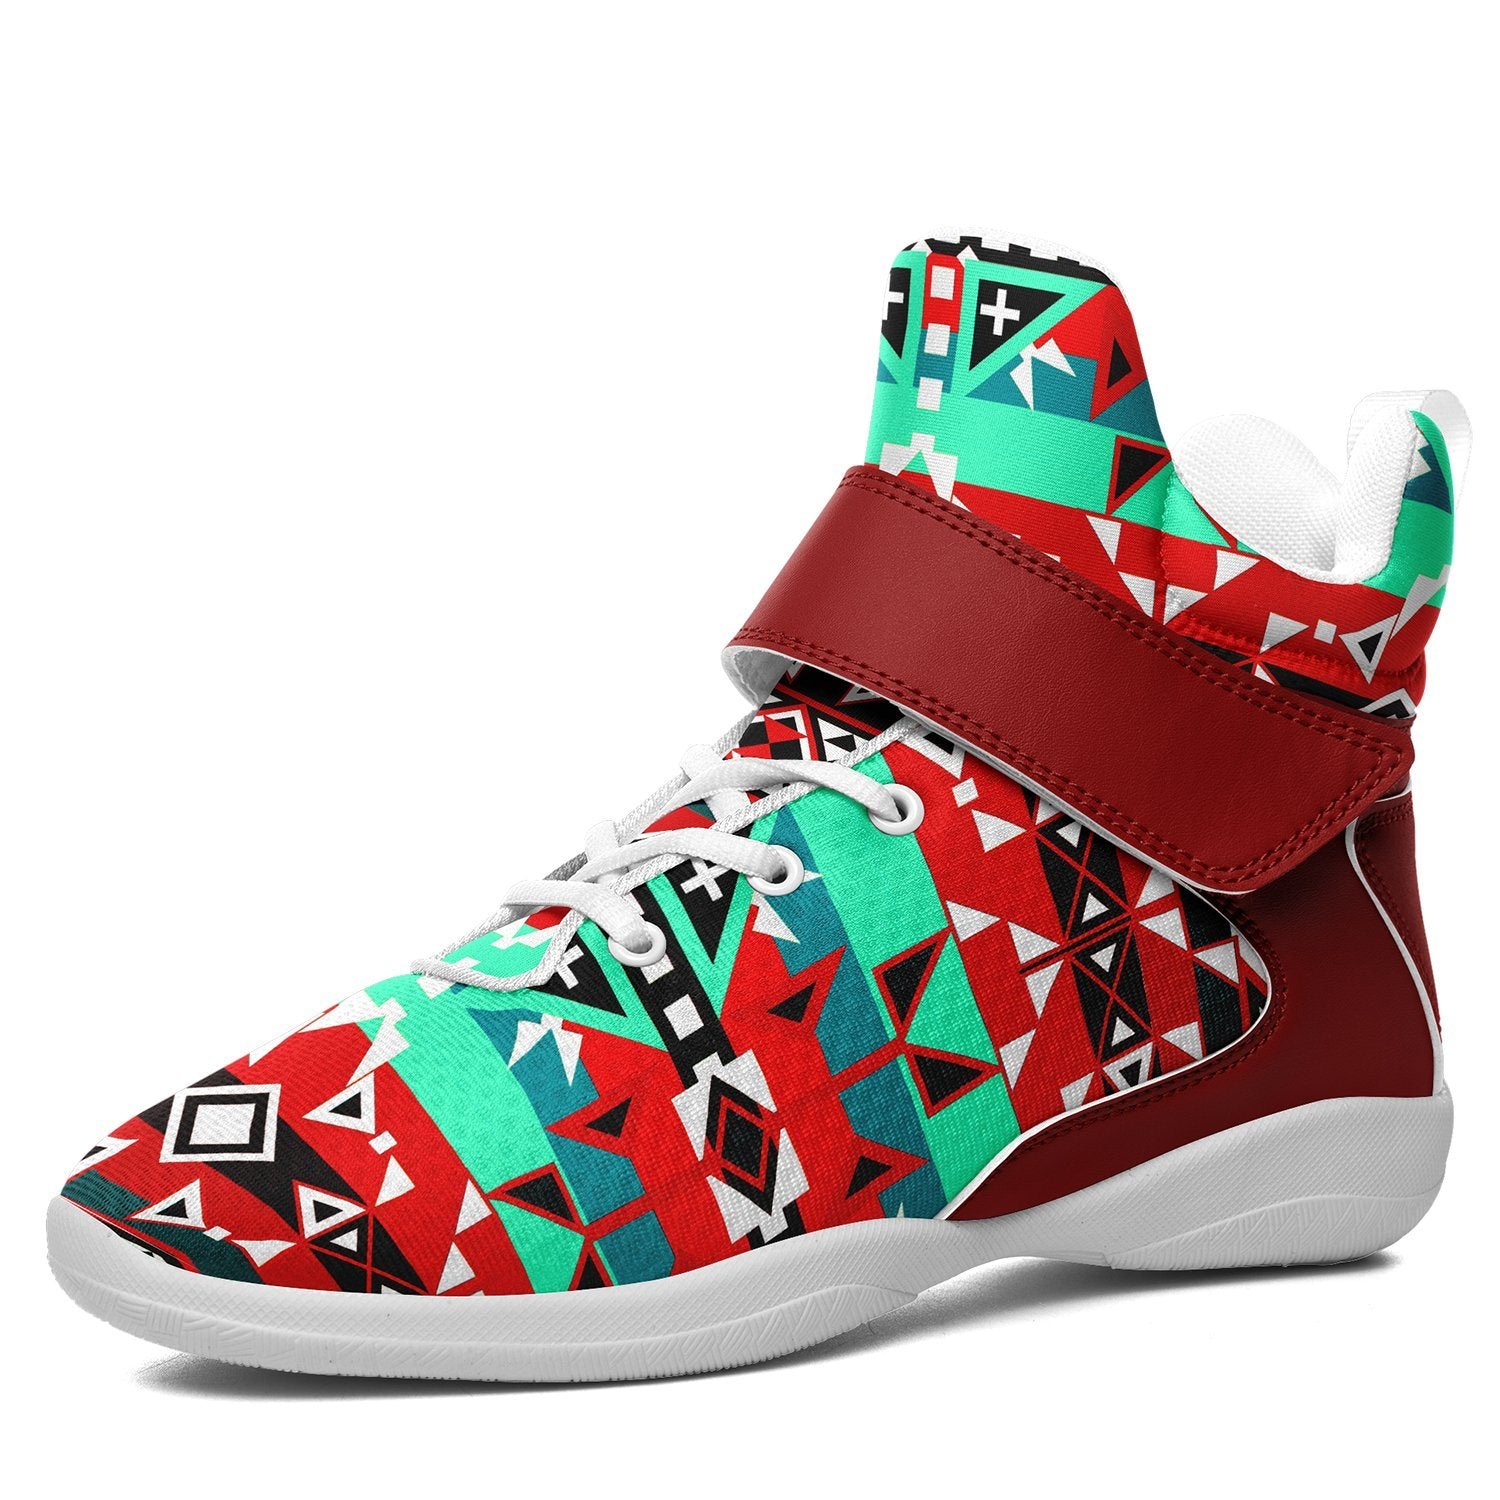 After the Southwest Rain Ipottaa Basketball / Sport High Top Shoes 49 Dzine US Women 4.5 / US Youth 3.5 / EUR 35 White Sole with Dark Red Strap 